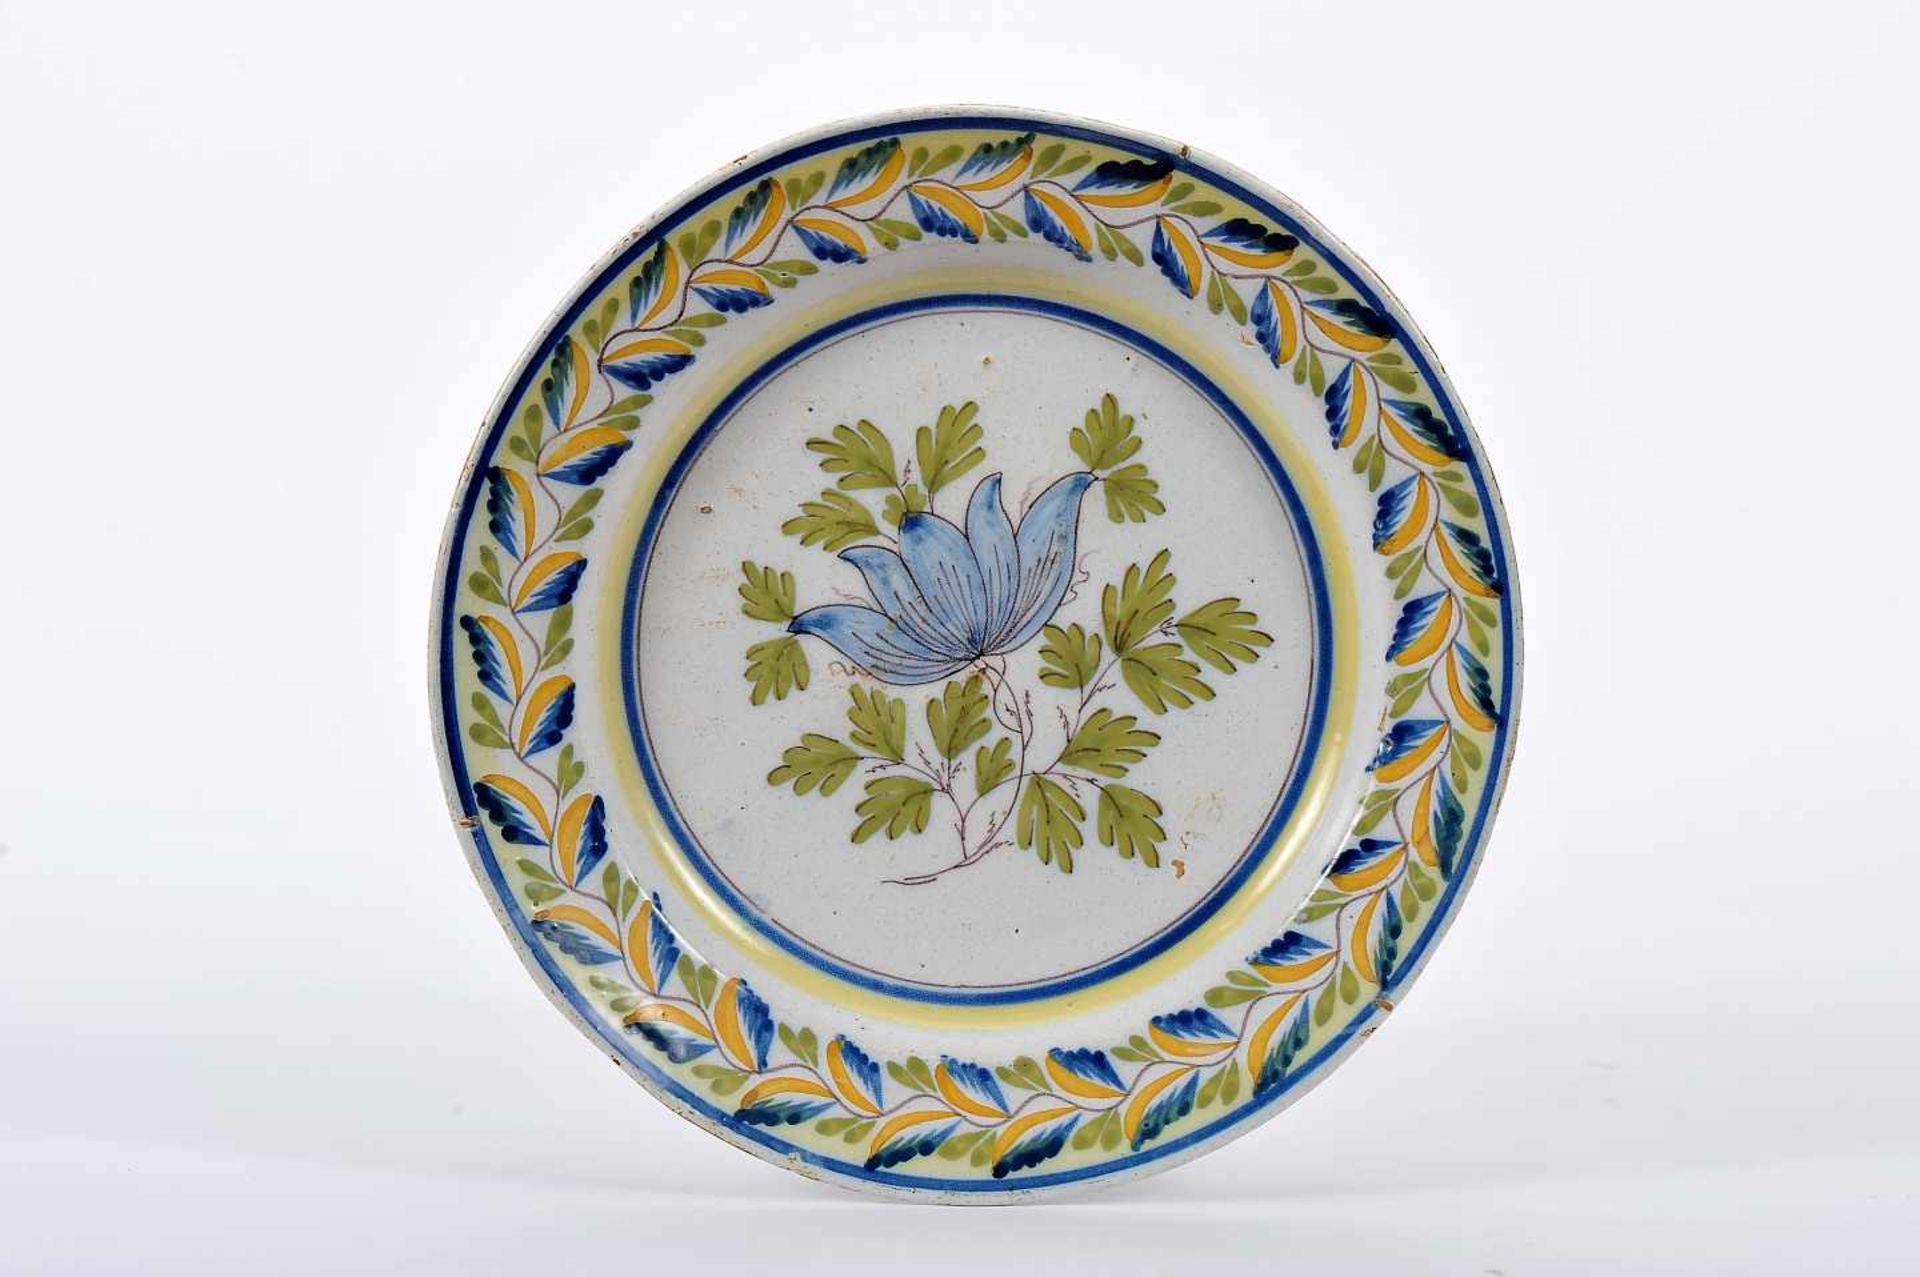 A DishA Dish, faience of Fervença, blue, green and yellow decoration "Flower and leaves",